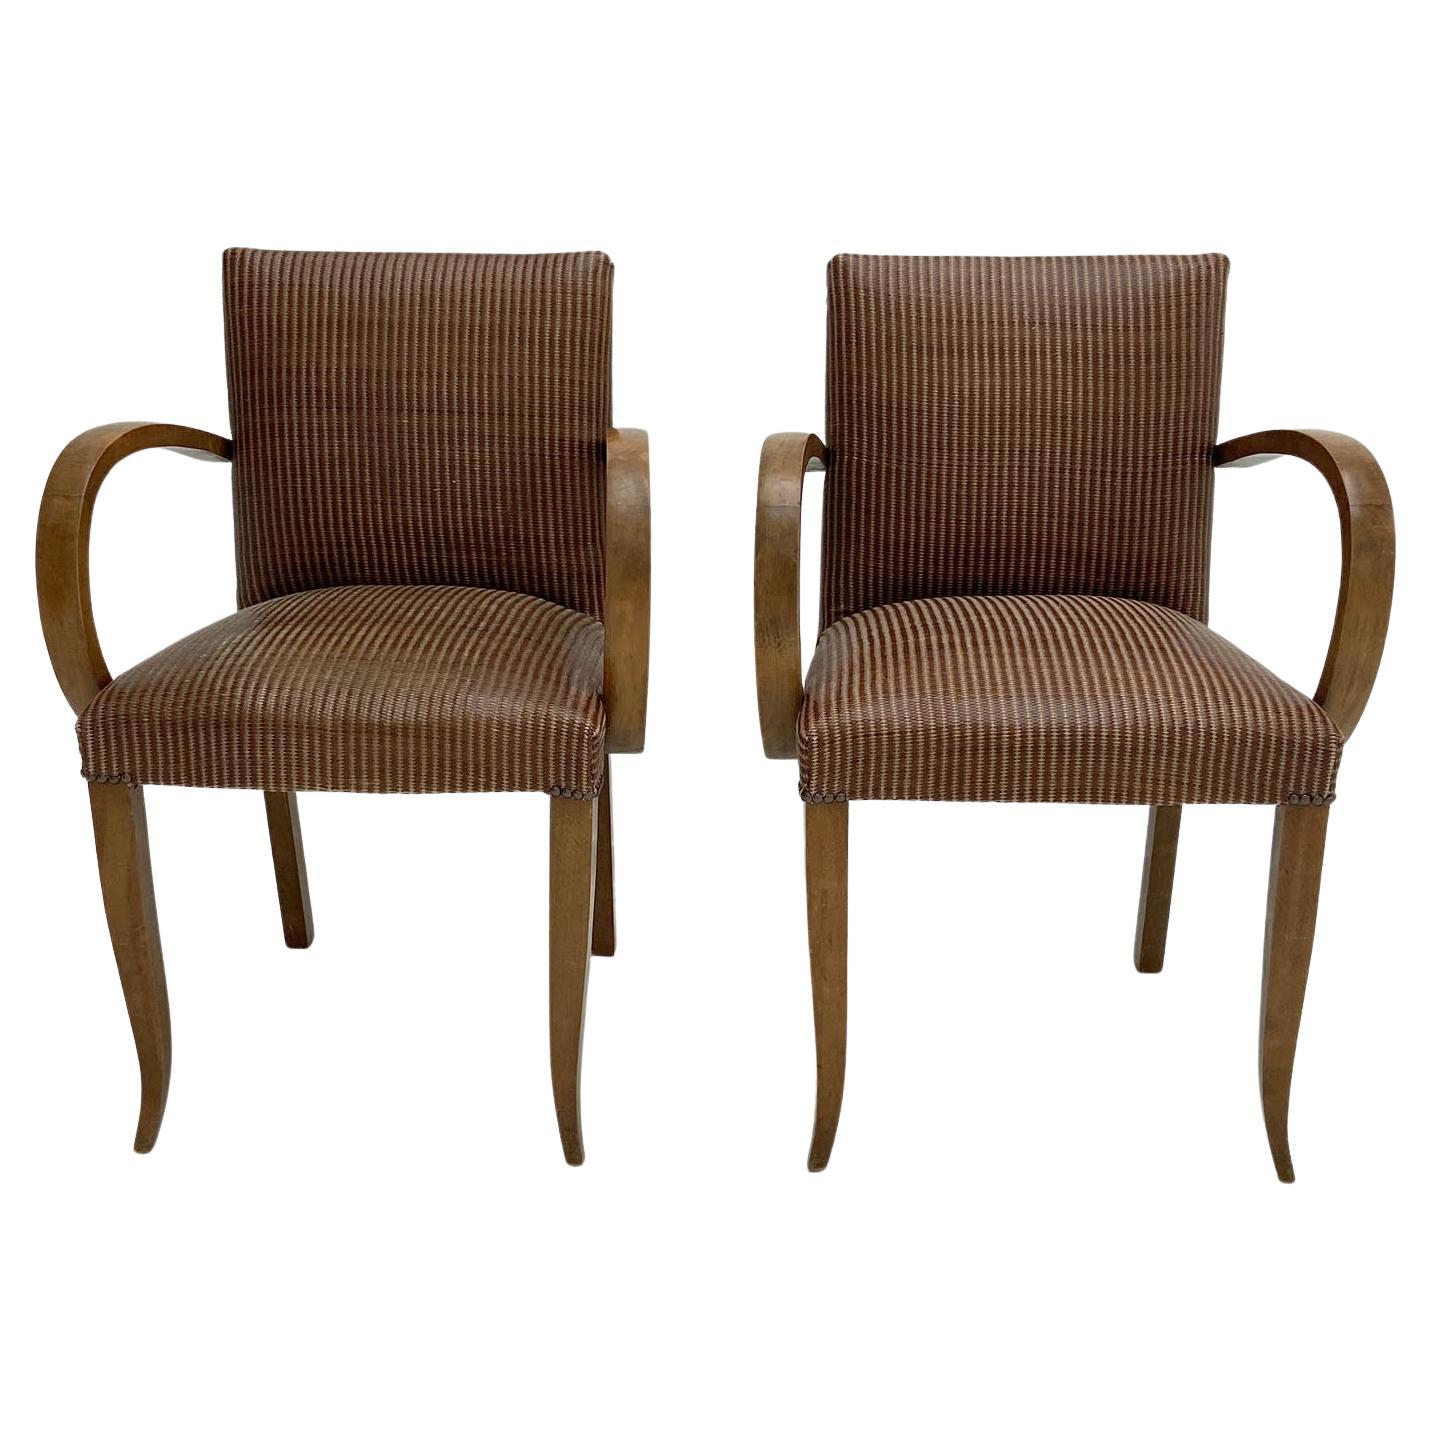 Pair of Modernist Bridge Chairs or Armchairs, French, 1930s For Sale